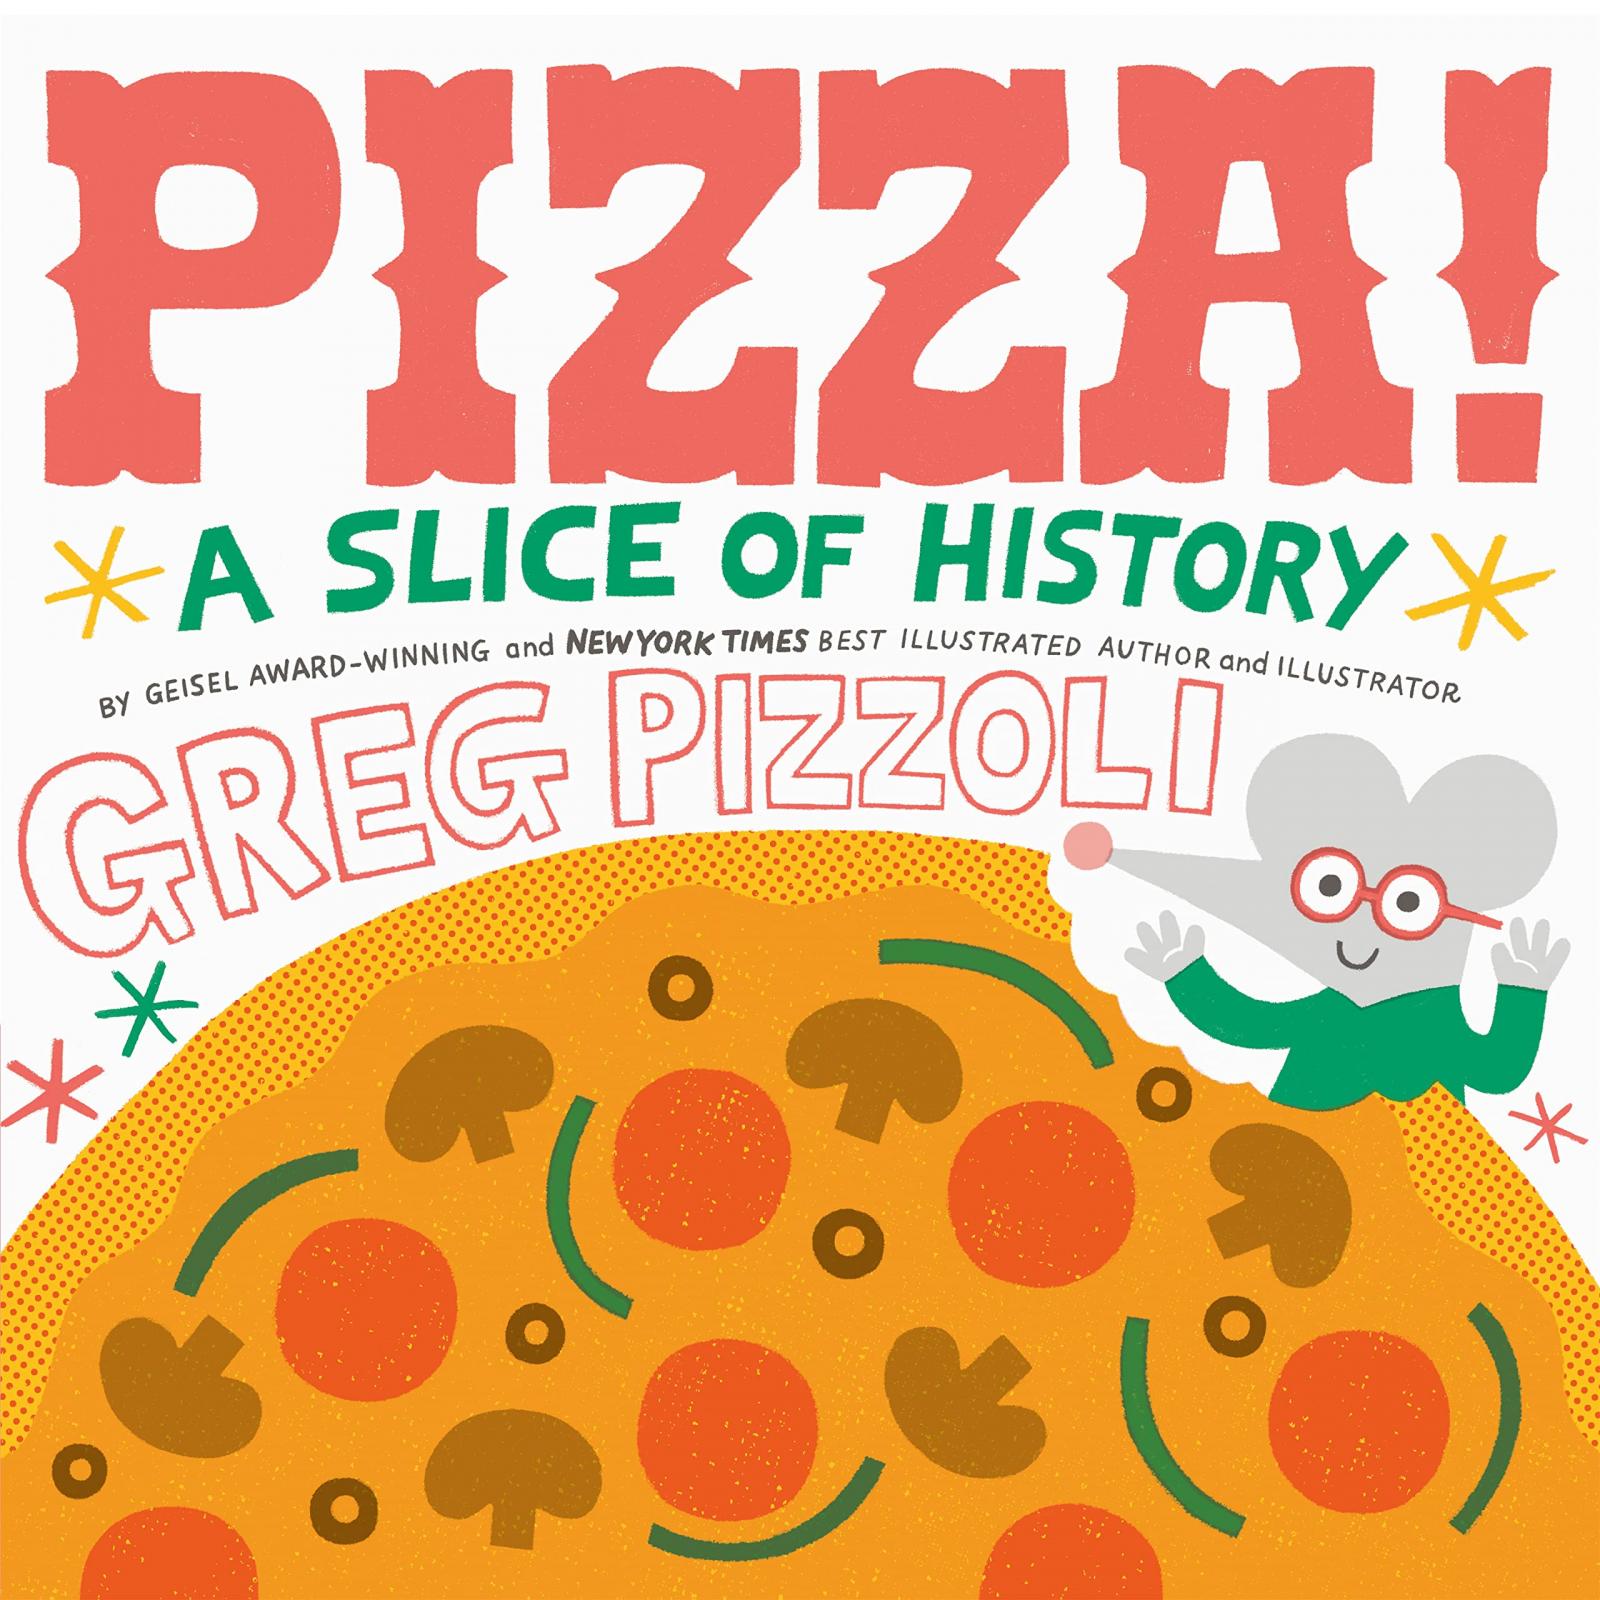 Pizza! A Slice of History by Greg Pizzoli